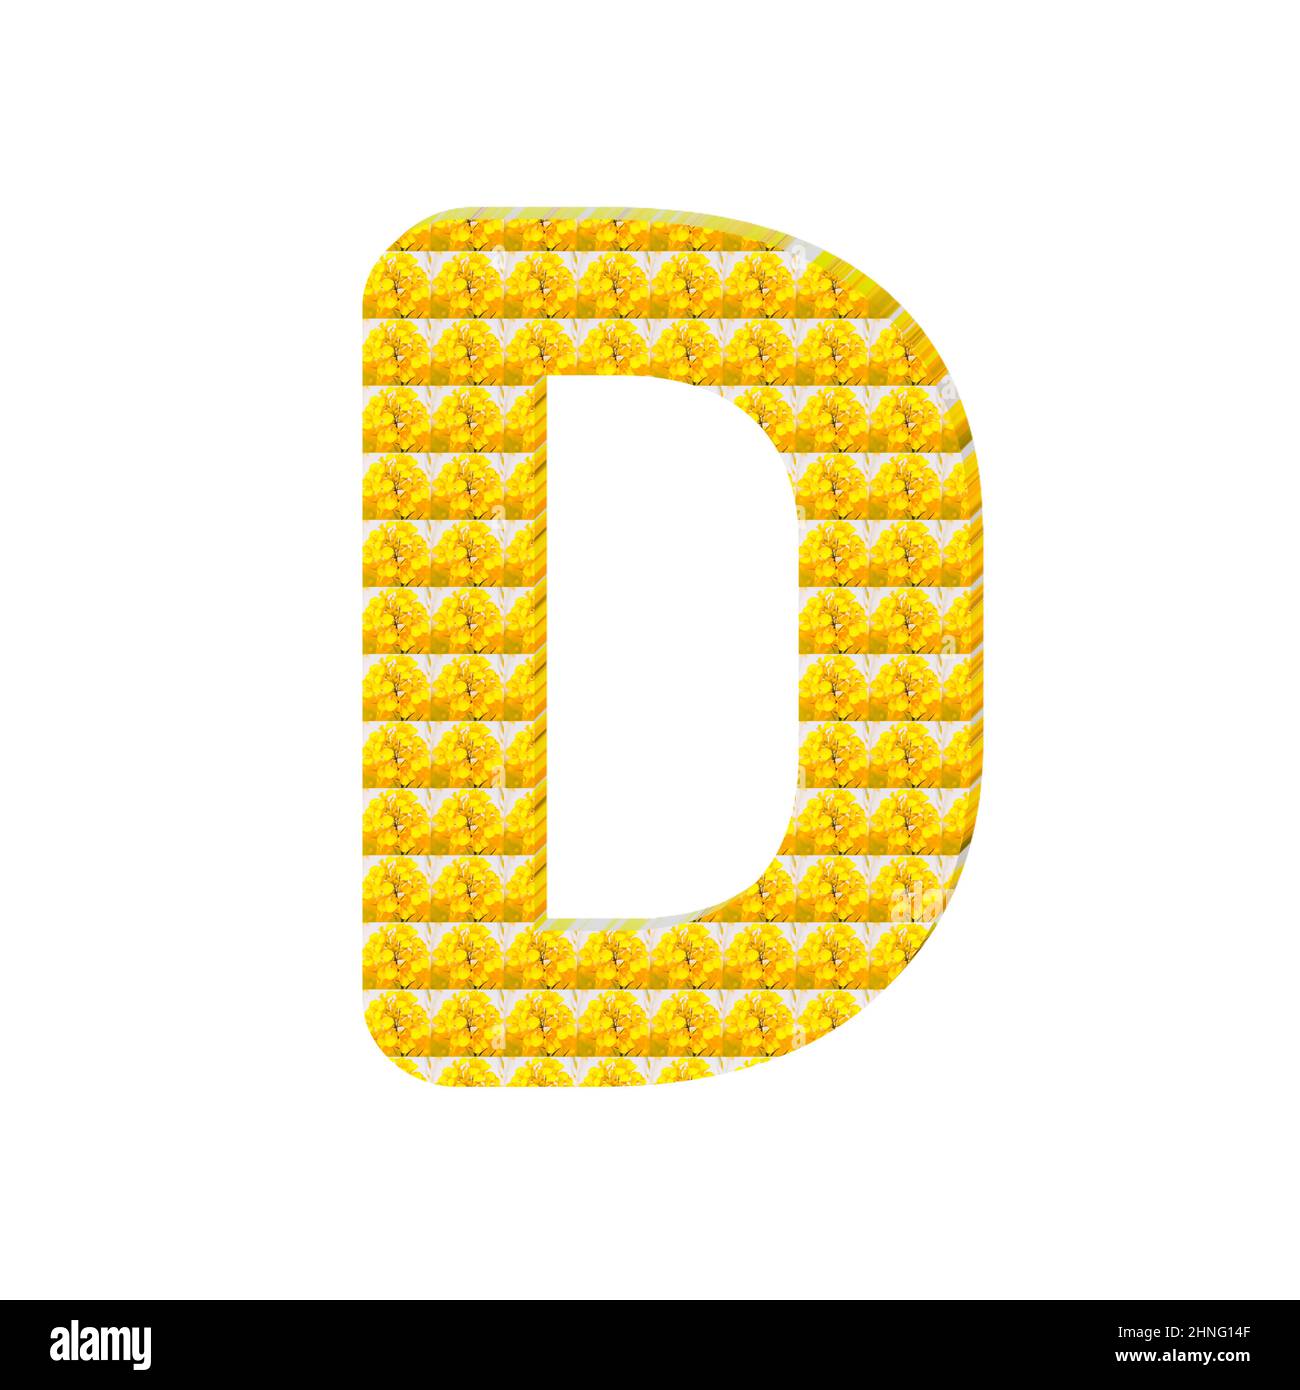 3d illustration of a letter D composed of yellow mustard flowers  isolated on white background Stock Photo